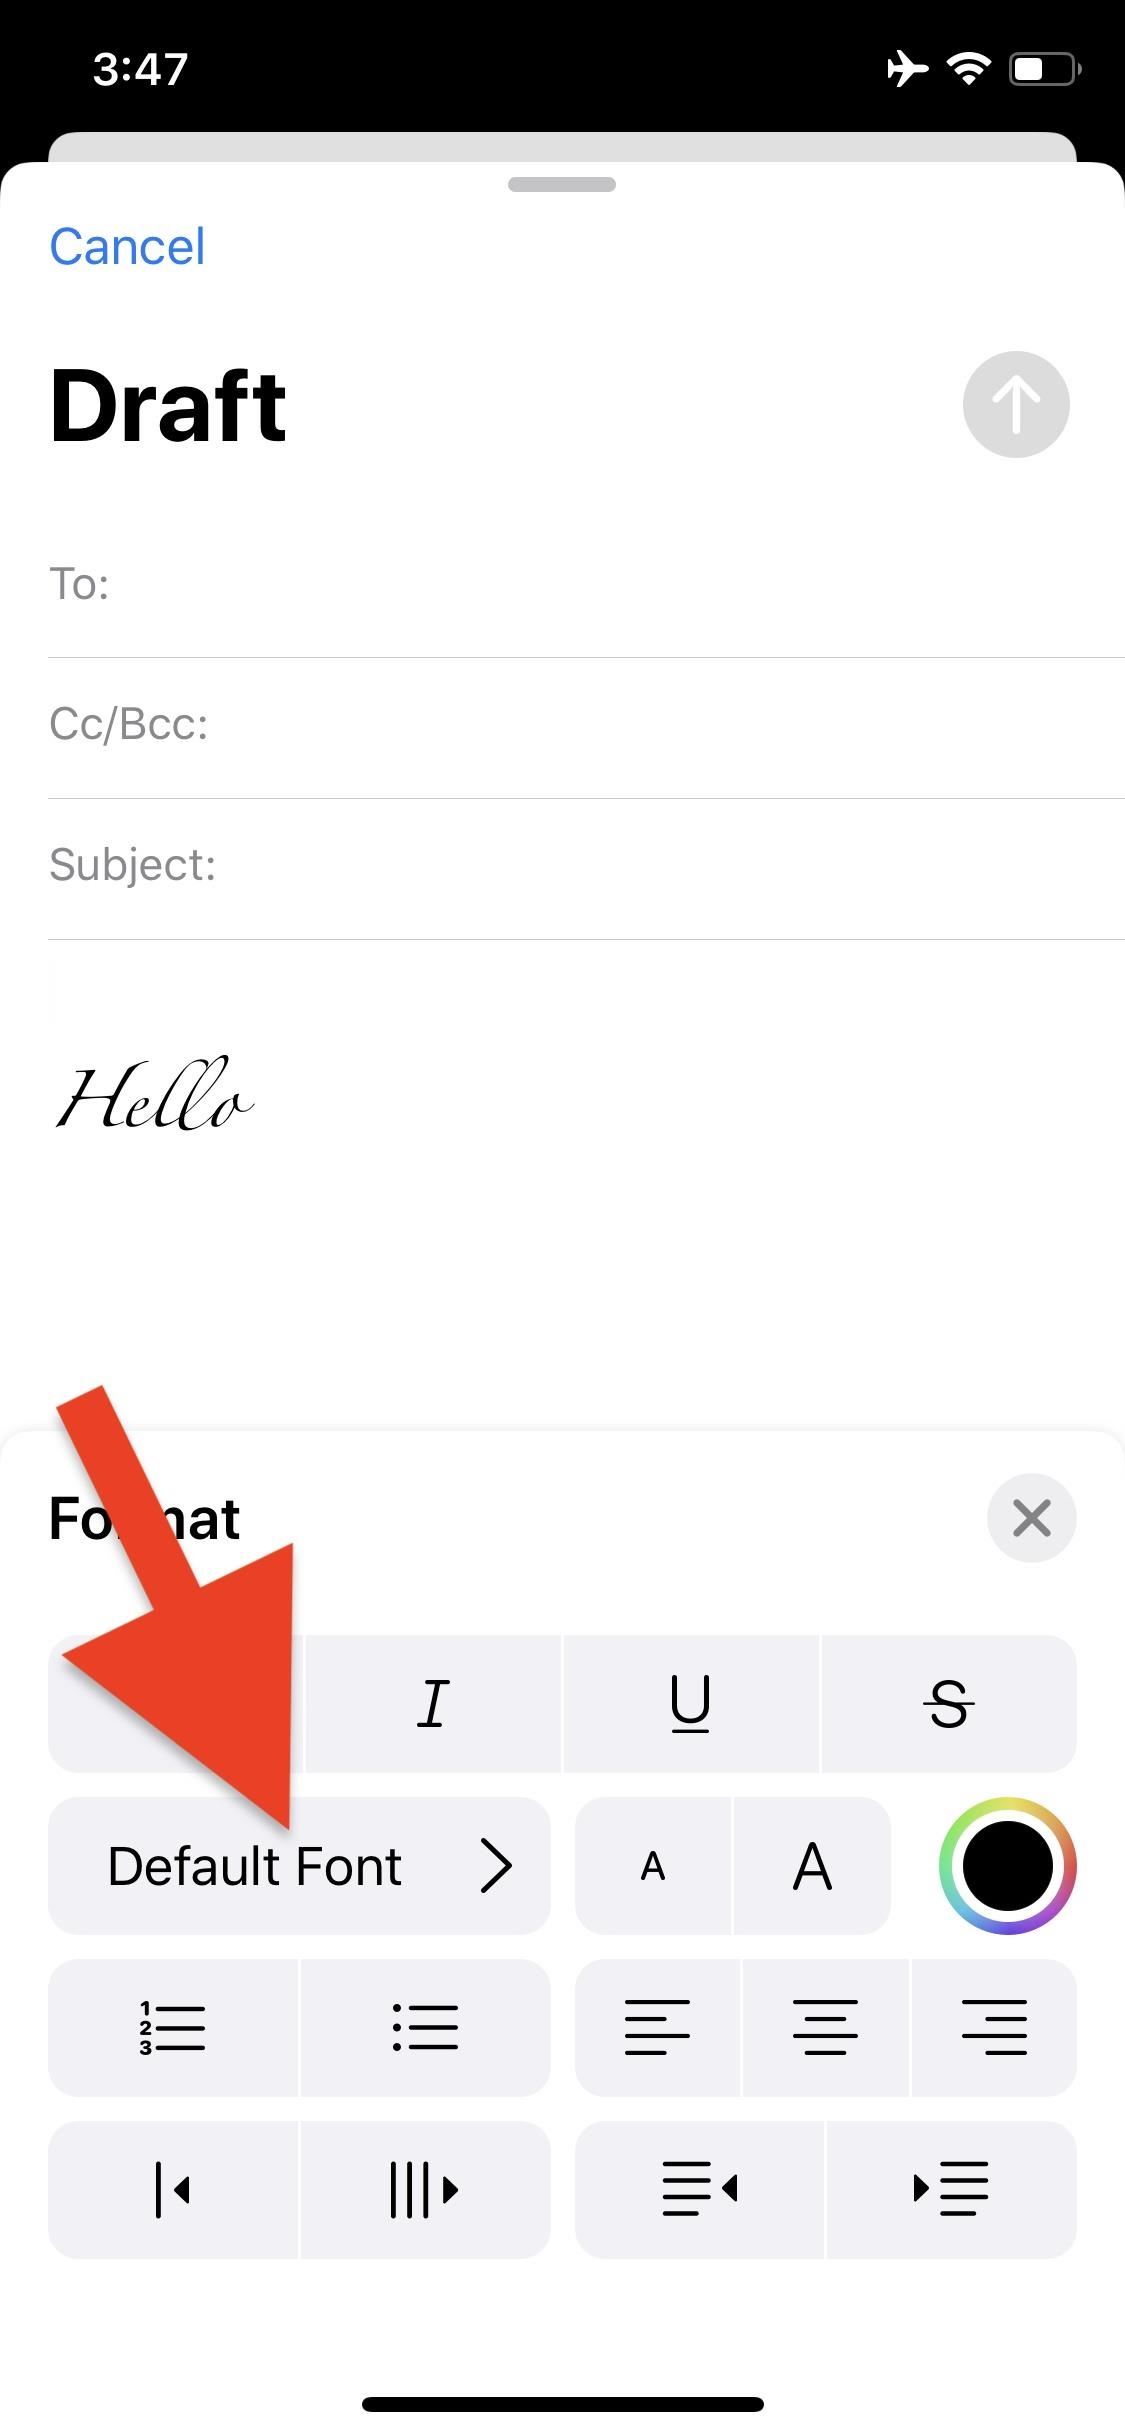 How to Return to the Default Font in Mail Drafts After Using a Custom One